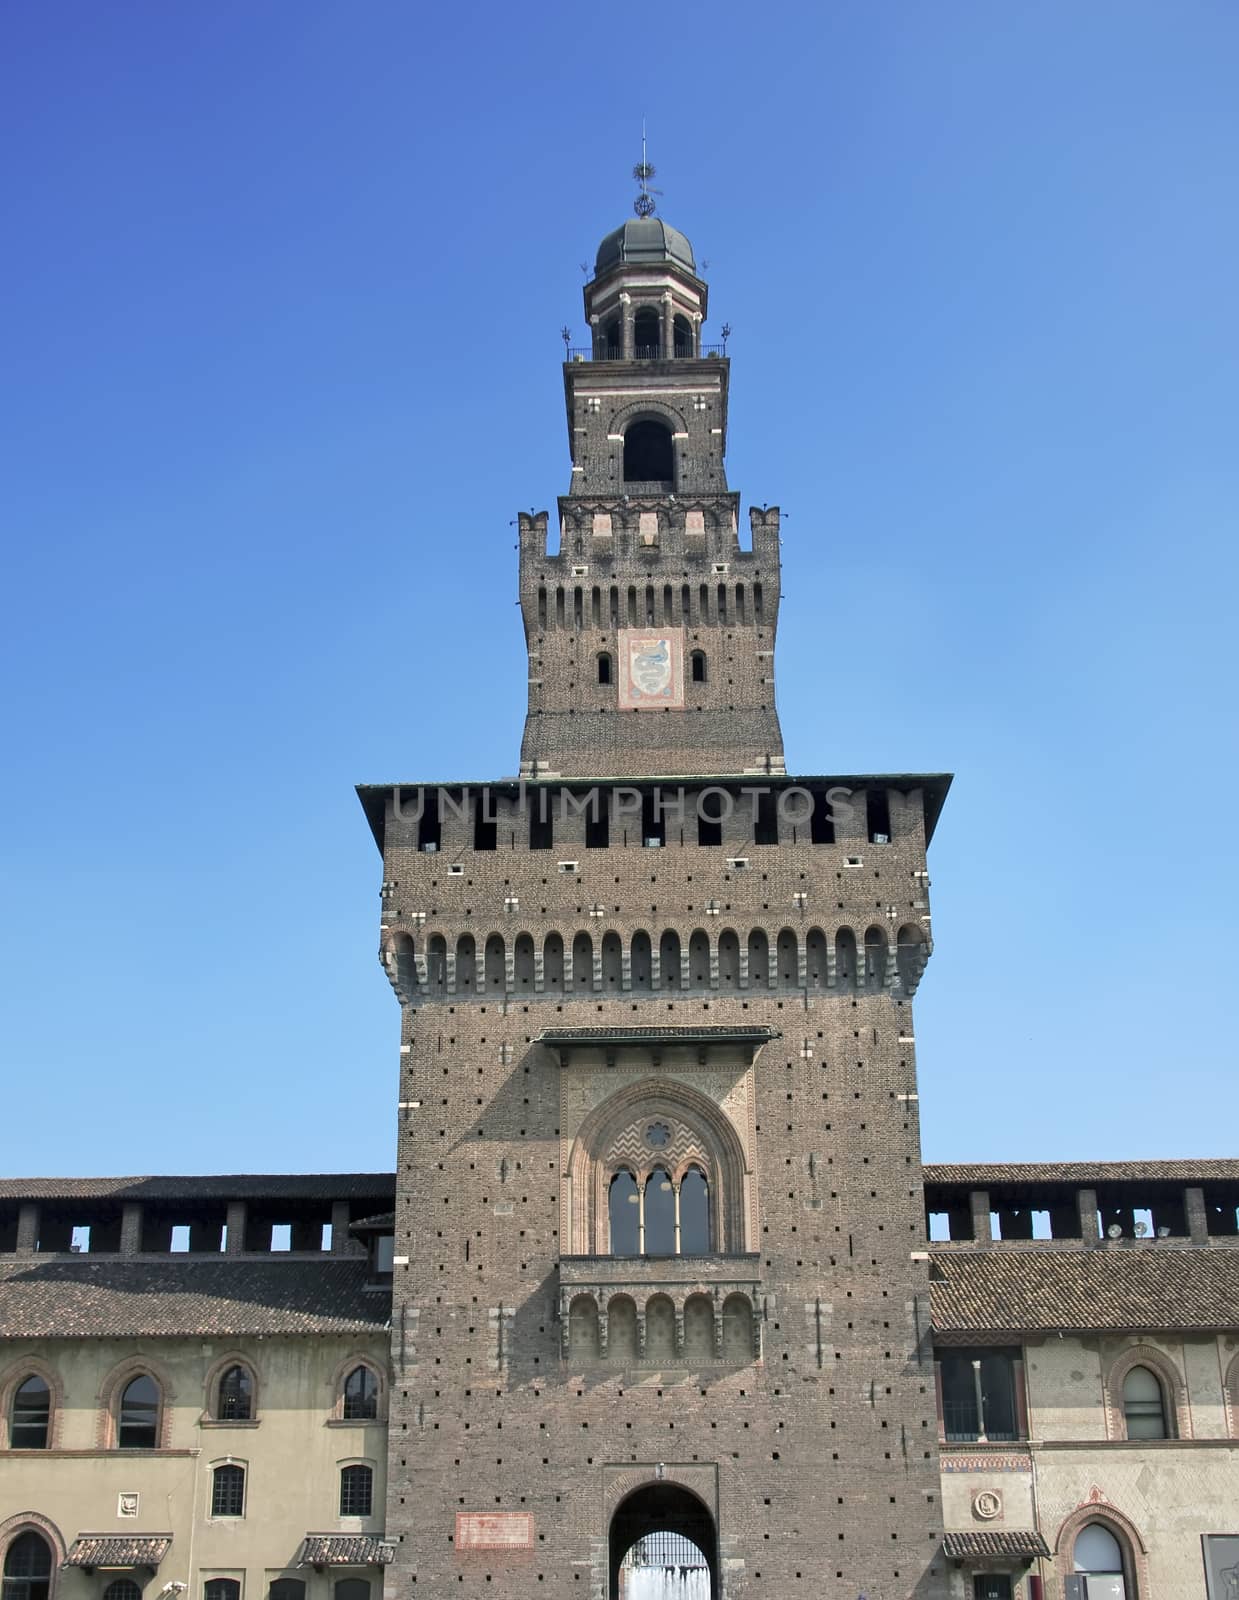 The entry tower to Sforza's castle in Milan by fotoecho